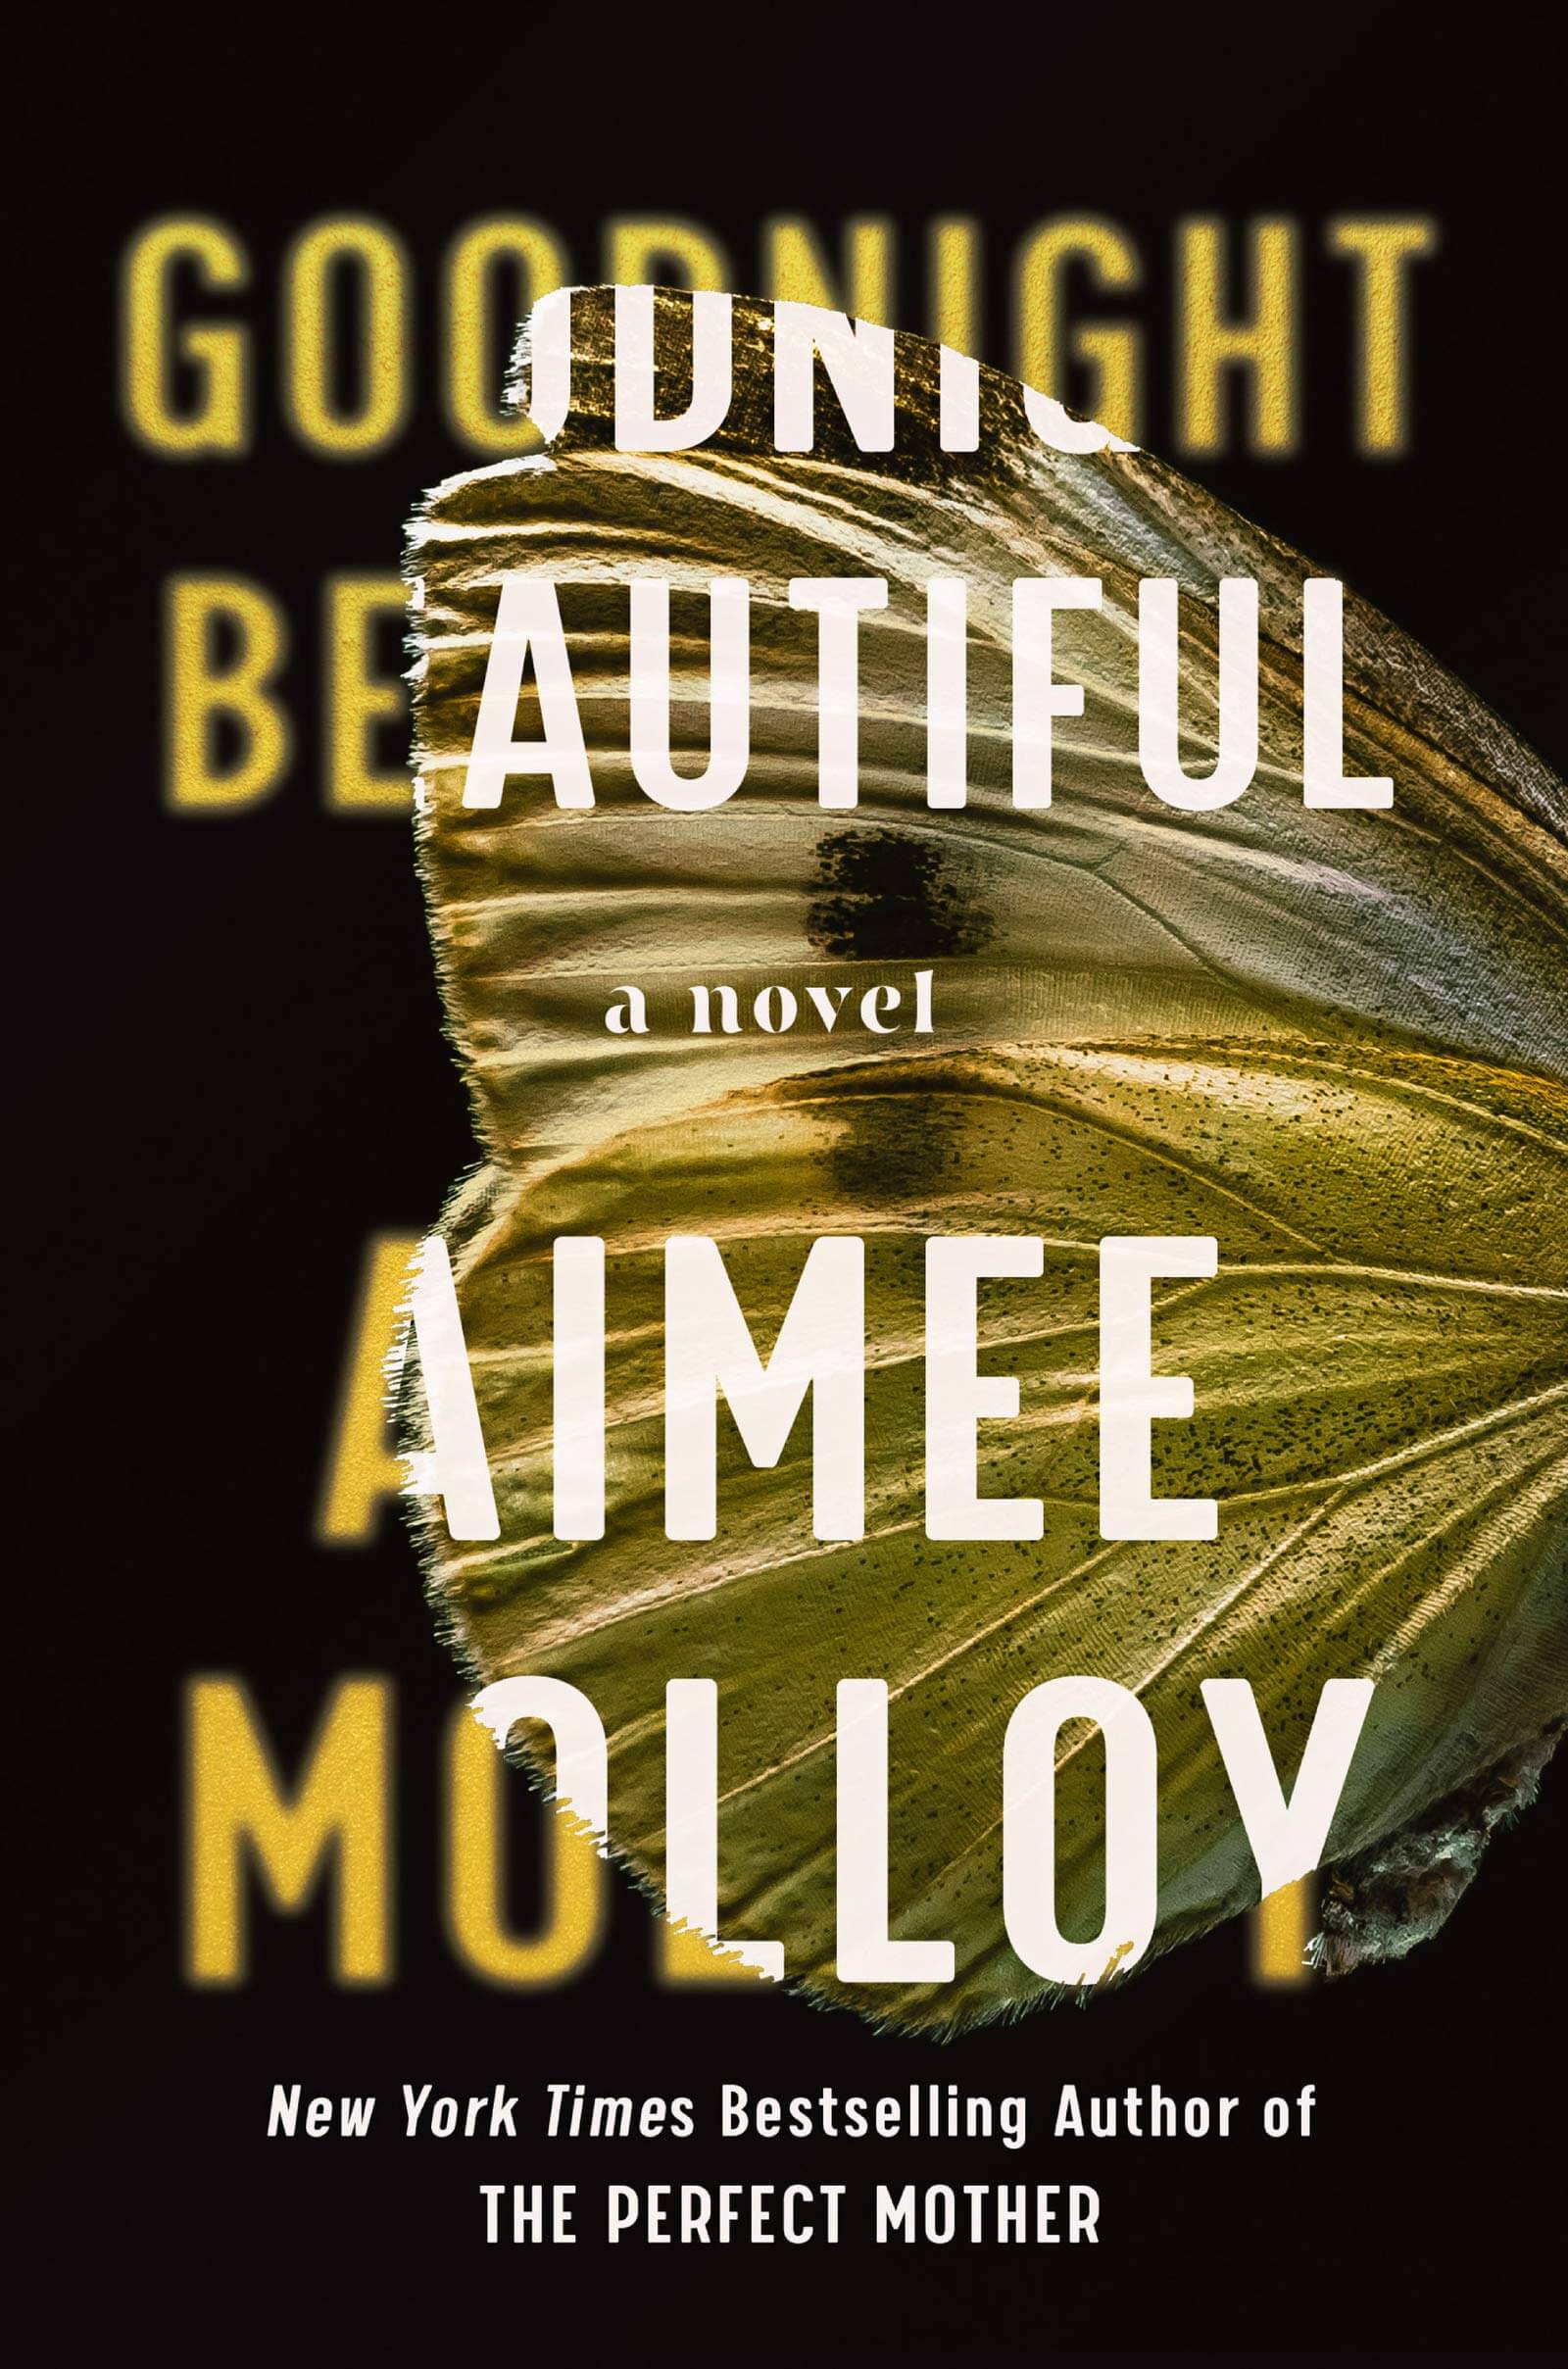 Cover of Goodnight Beautiful by Aimee Molloy